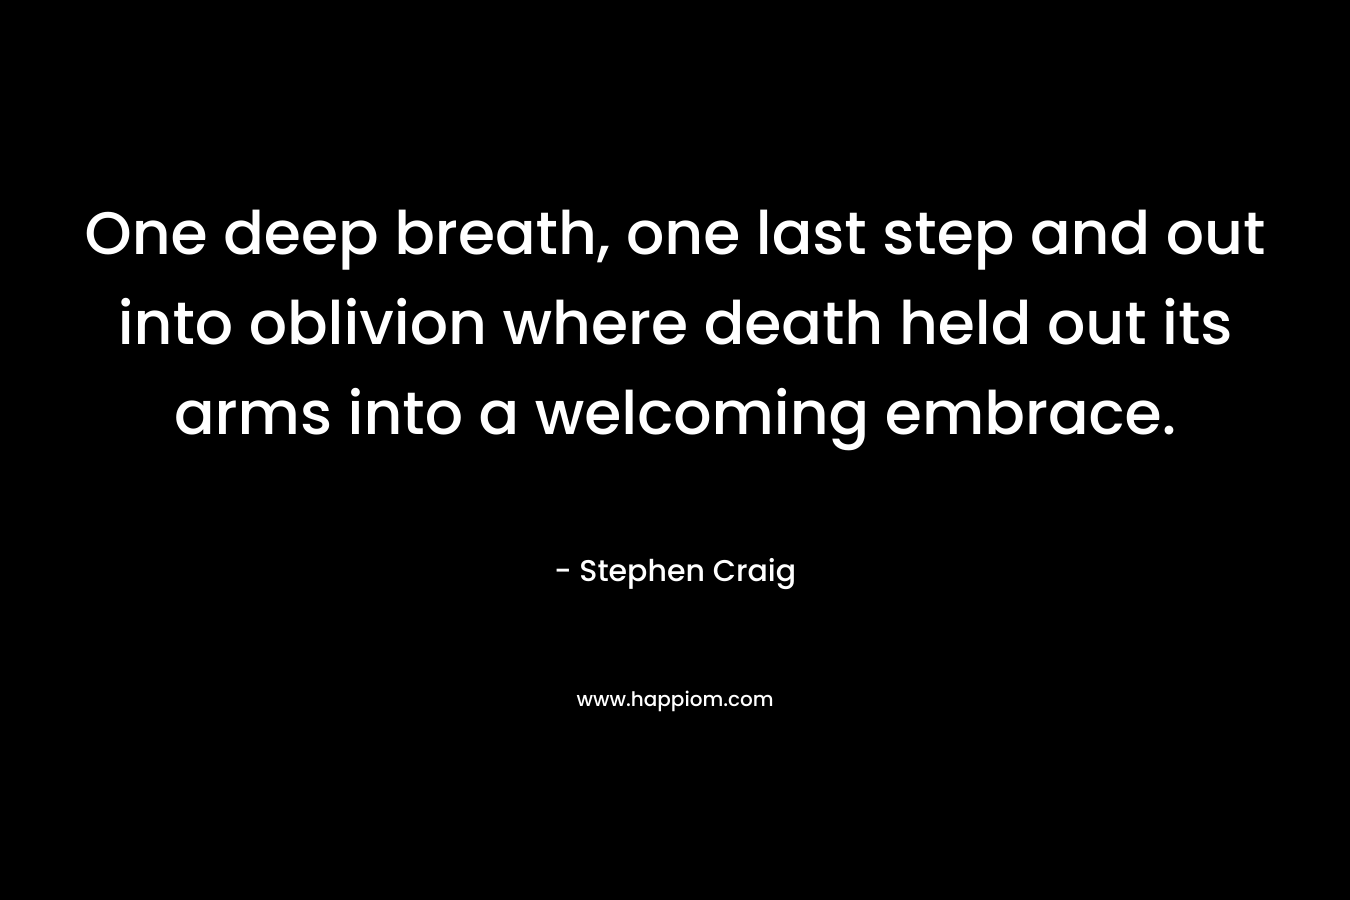 One deep breath, one last step and out into oblivion where death held out its arms into a welcoming embrace.